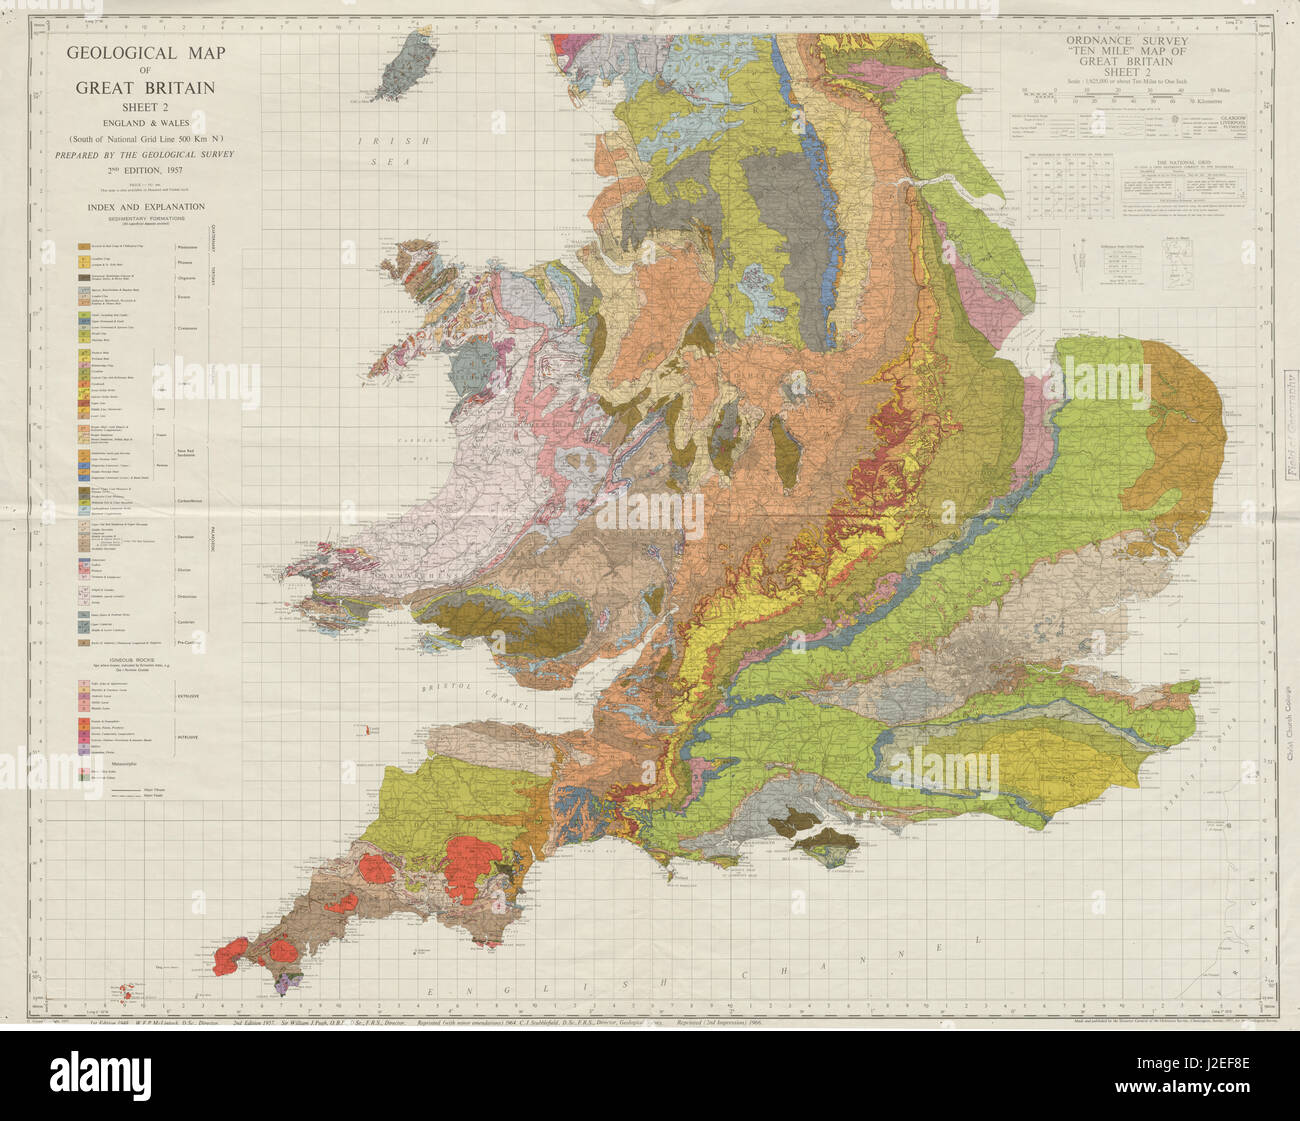 Image result for geology of england and wales